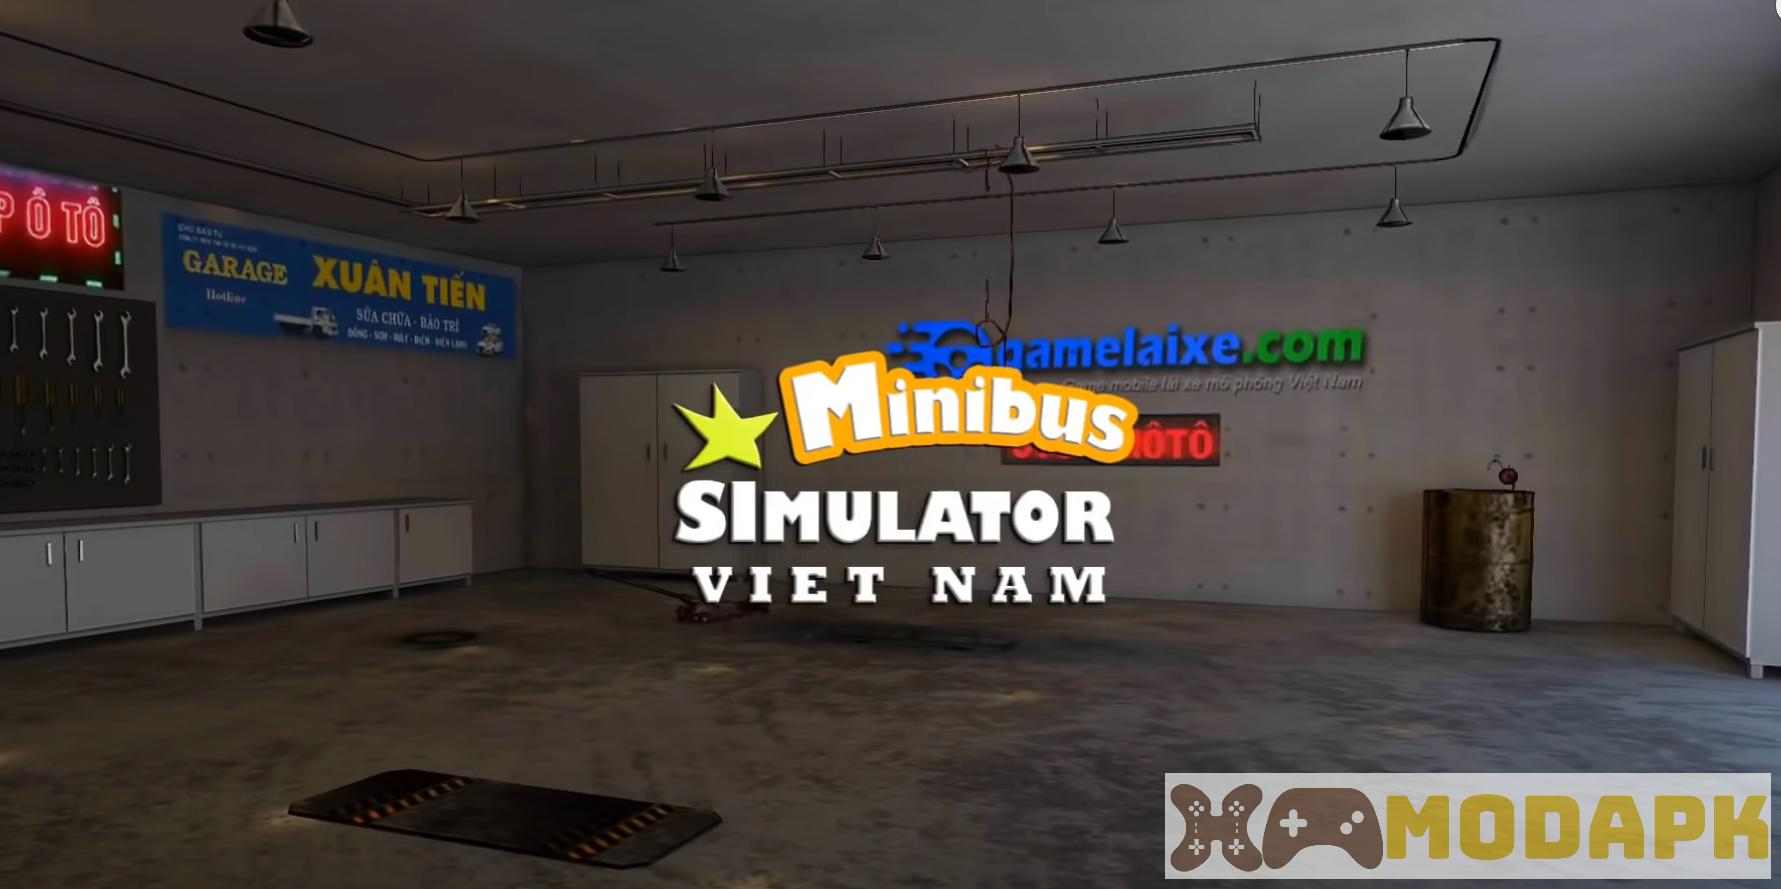 Minibus Simulator Vietnam APK MOD 1.5.9 (Free to Use, Enable All Features)